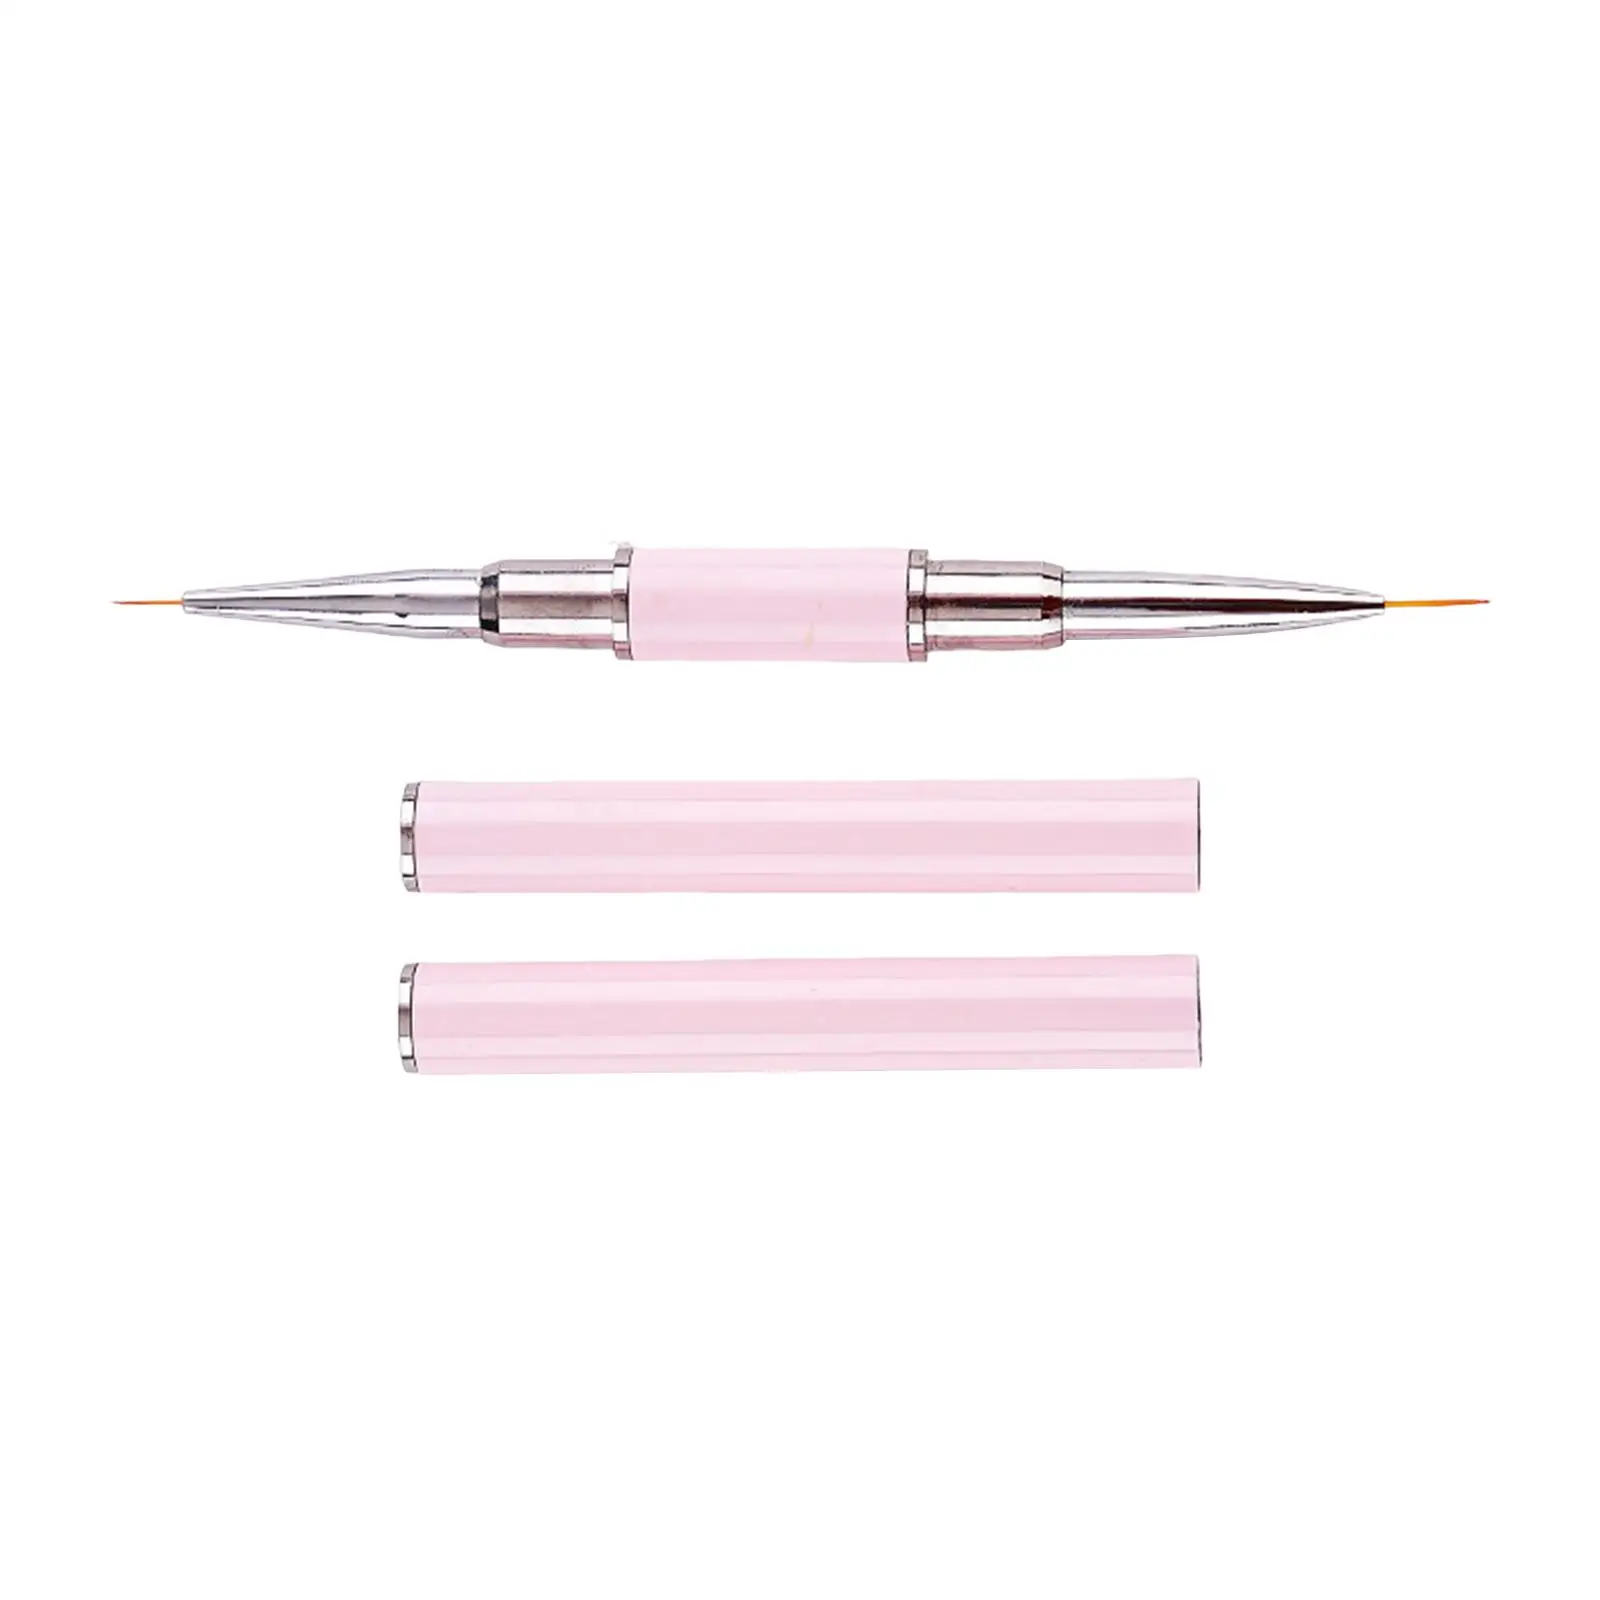 Nail Art Brushes Nail Drawing Pens for Thin Details Home Use Manicure Decoration Brushes Set Elongated Lines DIY Manicure Salon